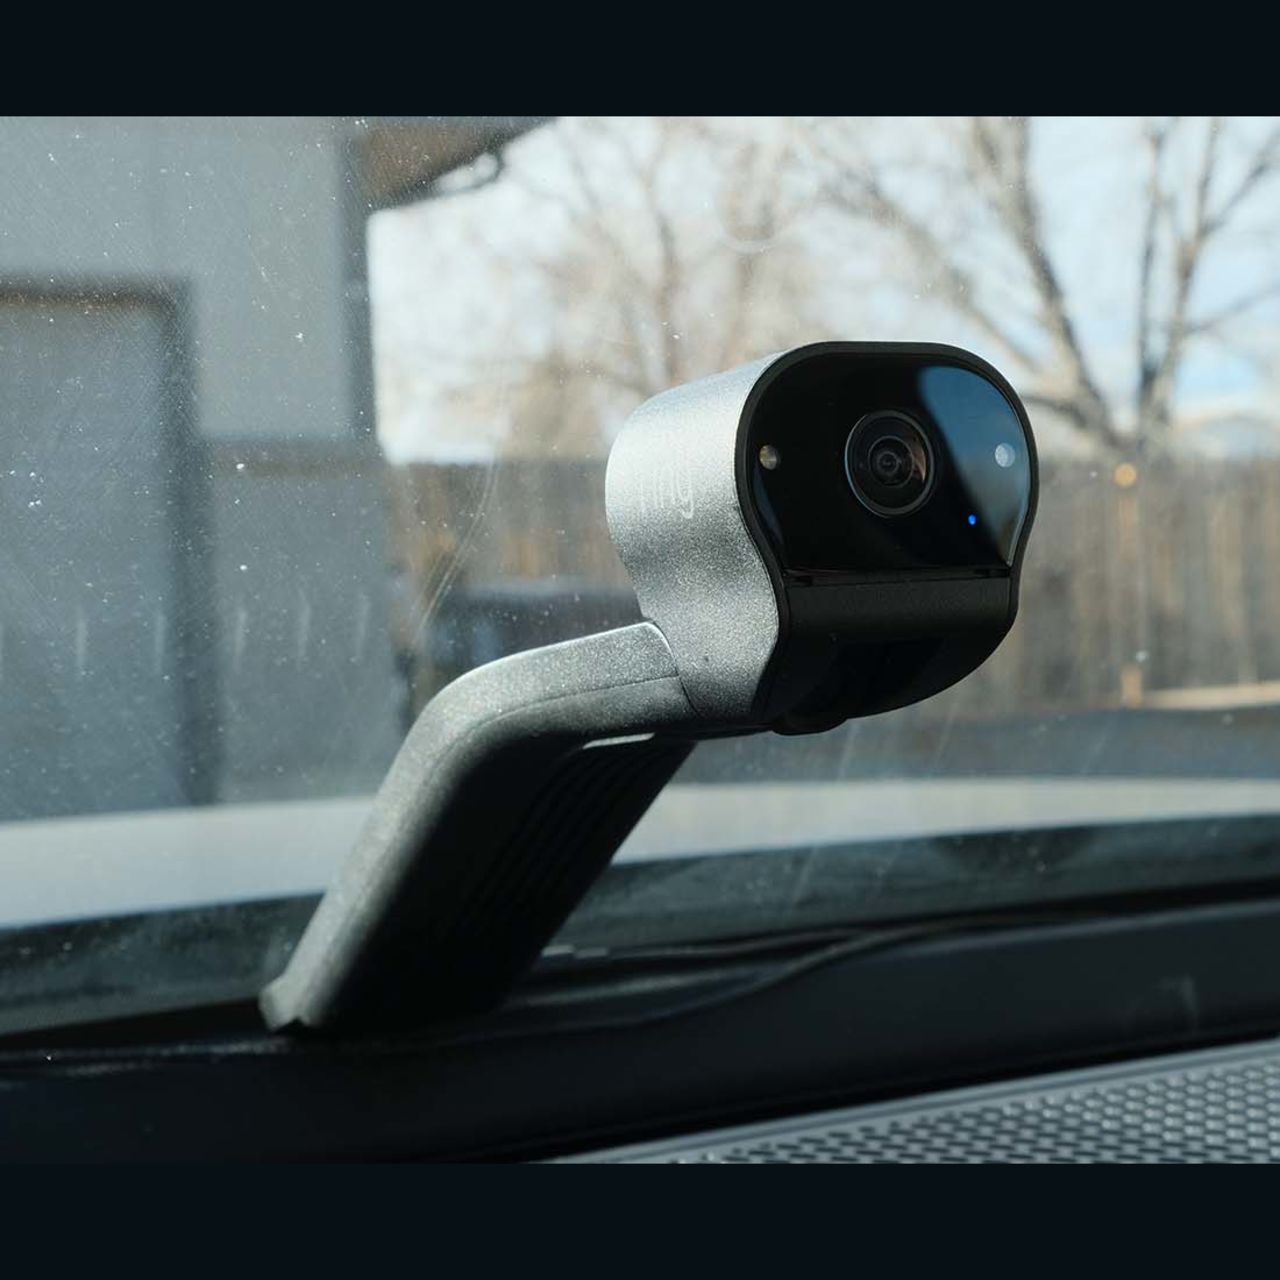 Dash Cams for Trucks in Vehicle Dash Cams 